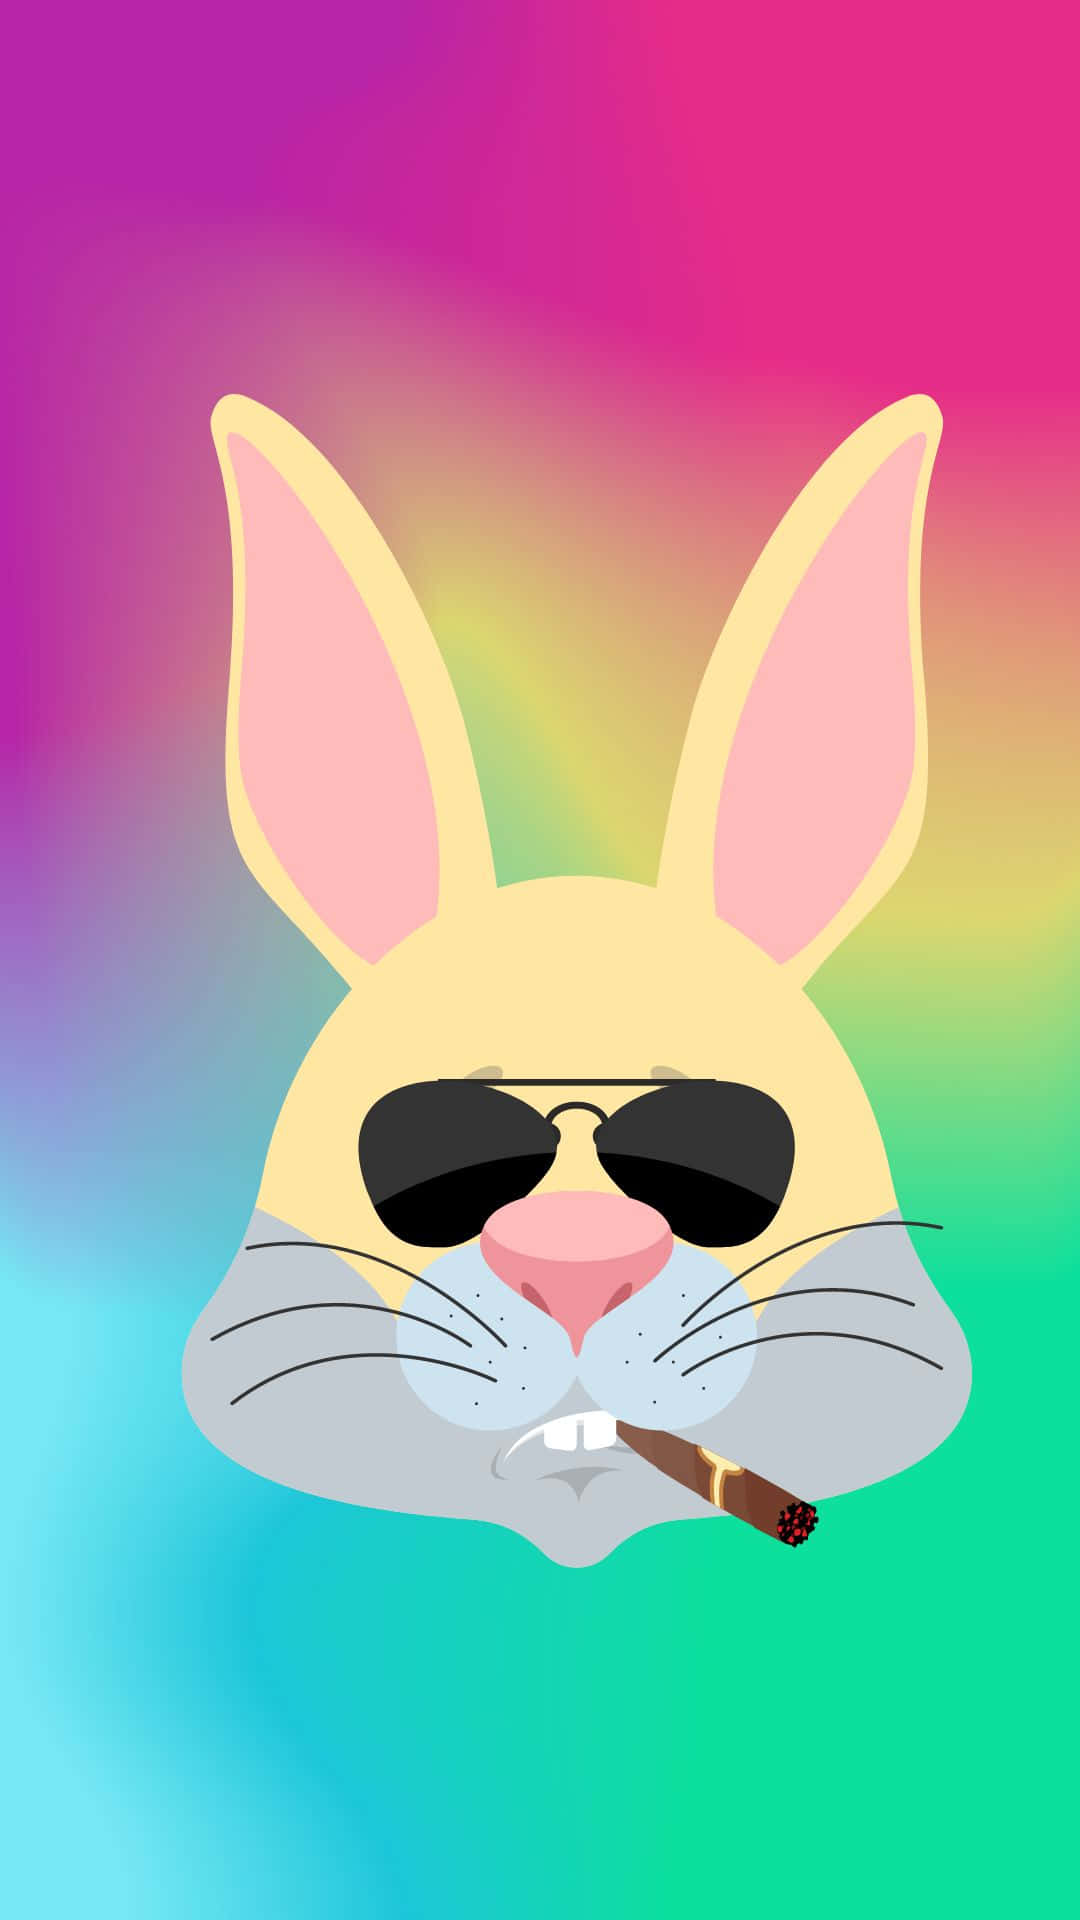 A Rabbit Wearing Sunglasses And Smoking A Cigarette On A Colorful Background